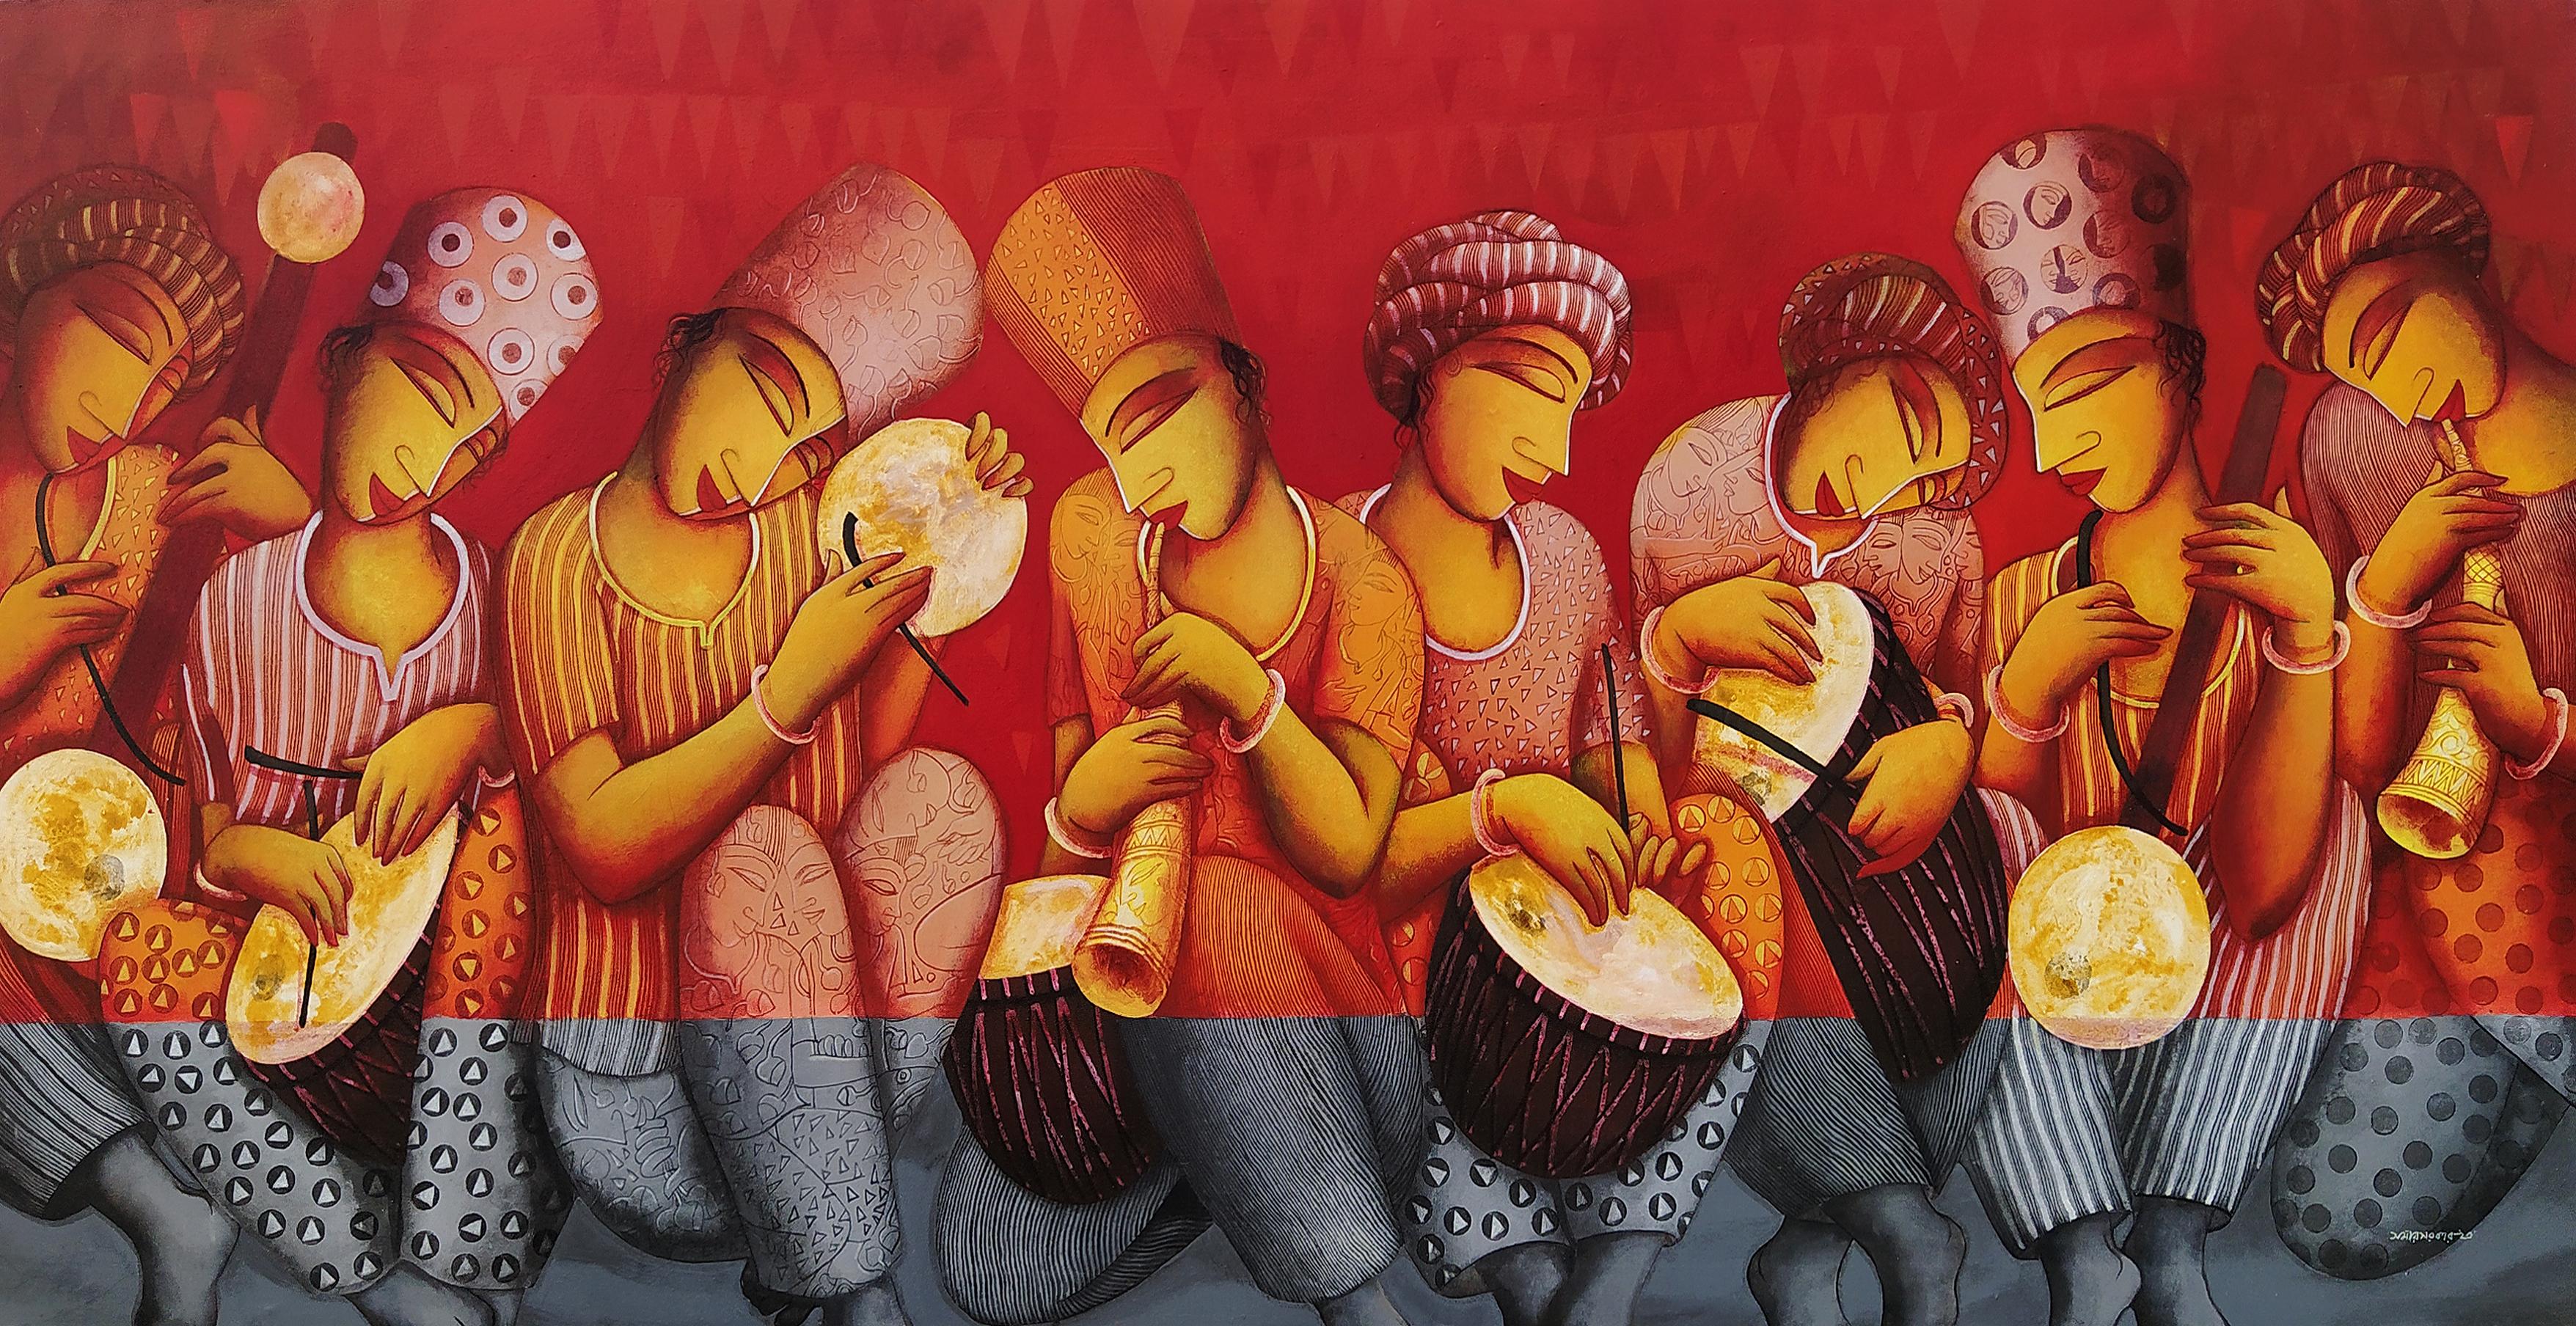 Musicians, Playing Drums, Acrylic on Canvas, Red, Yellow, Indian Artist"In Stock"